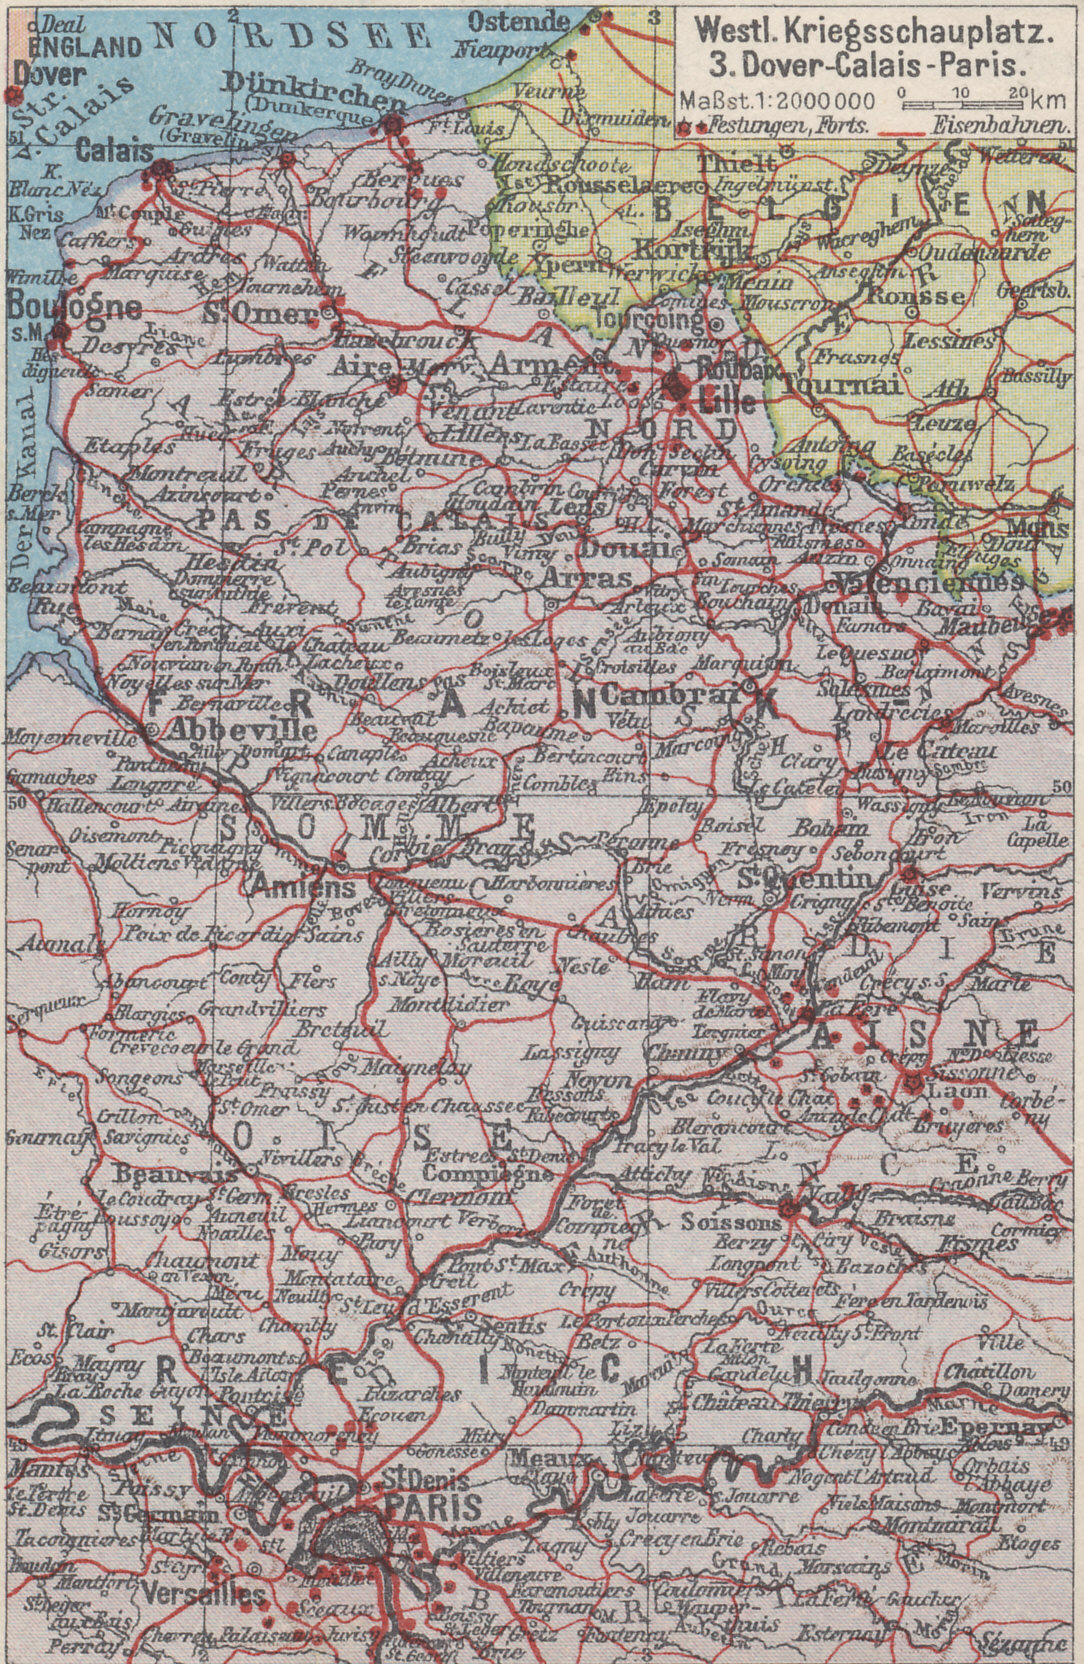 Map of the Western Front, from Dover to Calais, and south to Paris.
Text:
Westl. Kriegsschauplatzes
3. Dover-Calais-Paris
Festungen, Forts, Eisenbahn
Western Front
3. Dover-Calais-Paris
Fortresses, Forts, Railroads